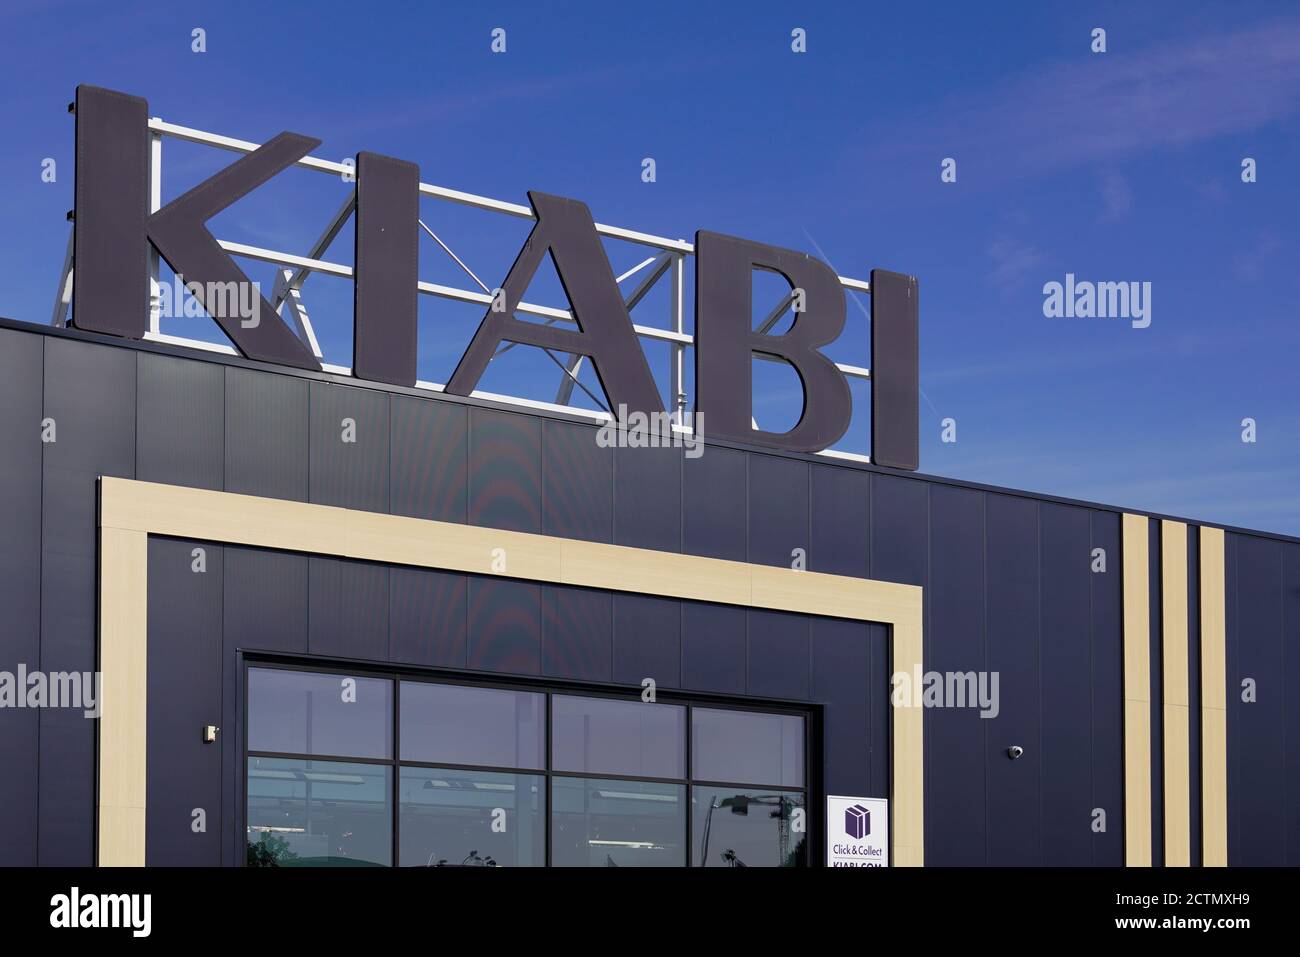 Bordeaux , Aquitaine / France - 09 20 2020 : Kiabi logo and text sign front  of building of low cost shop for fashion store clothing french company  Stock Photo - Alamy